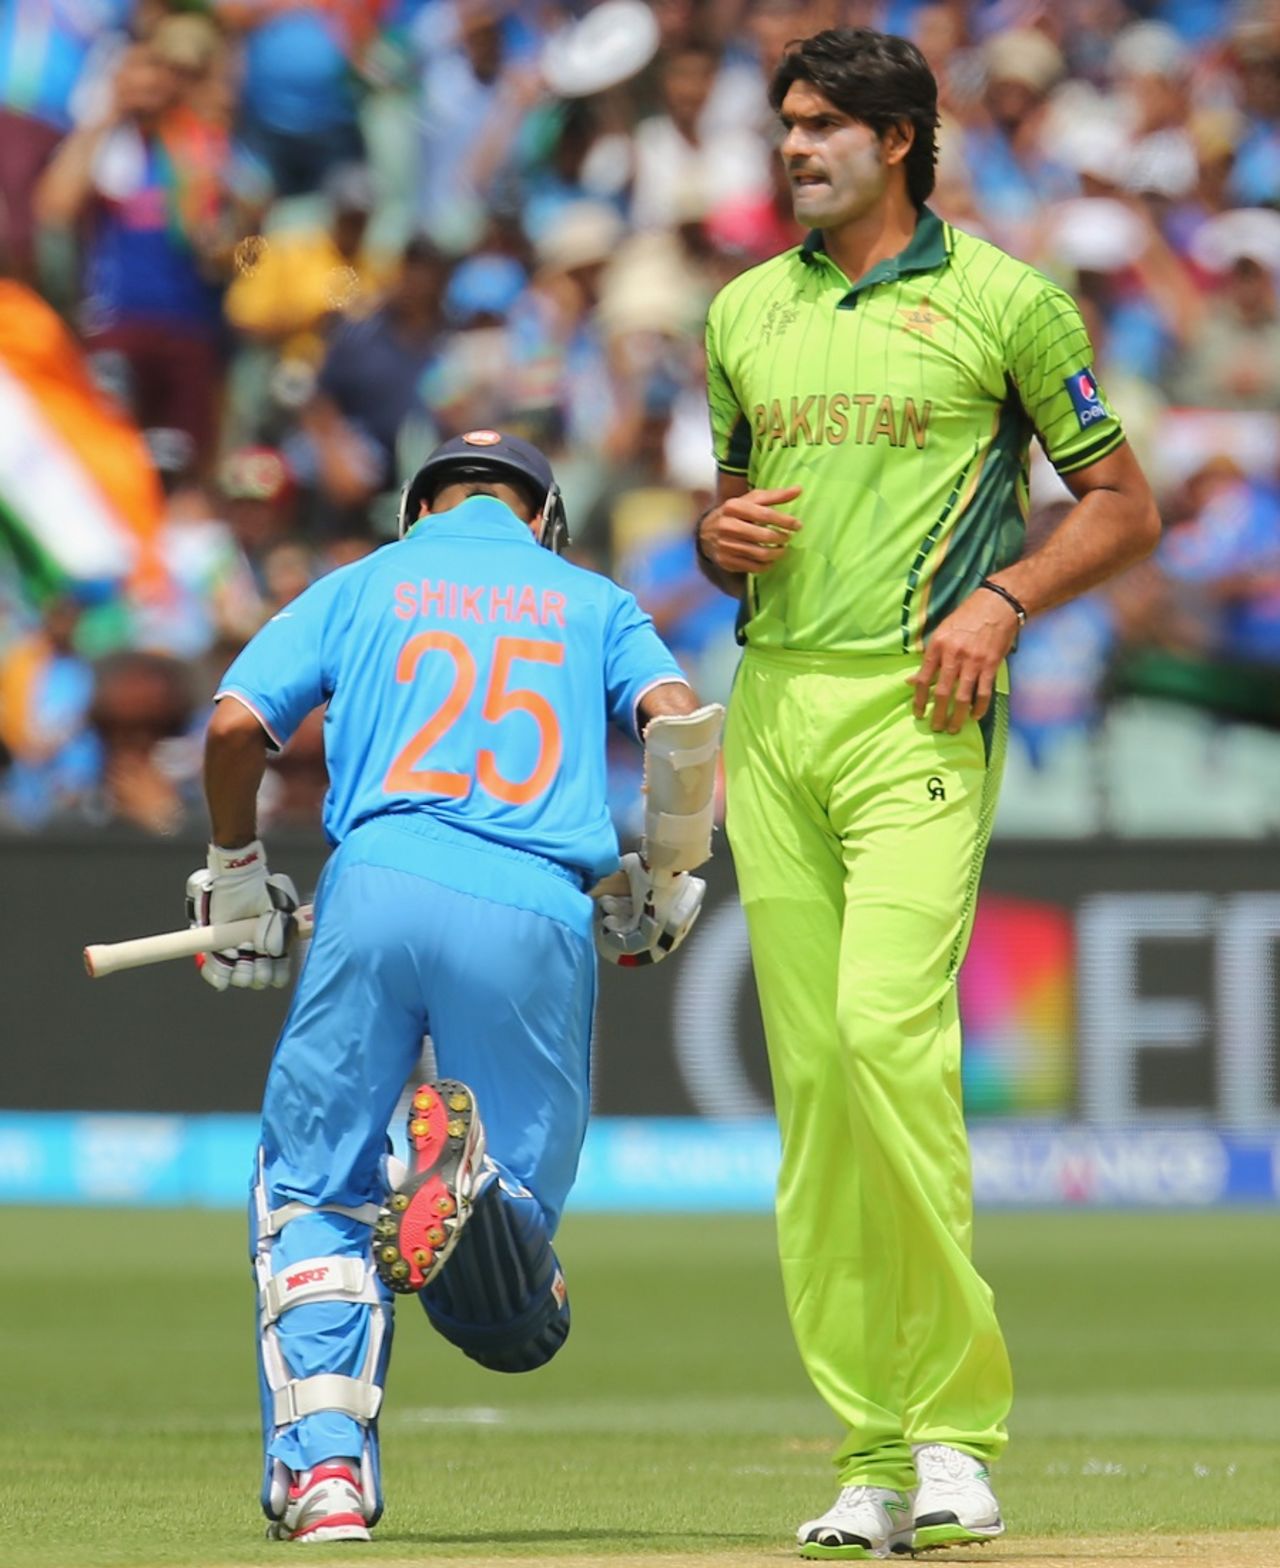 Mohammad Irfan bowled some well-directed short deliveries, India v Pakistan, World Cup 2015, Group B, Adelaide, February 15, 2015 